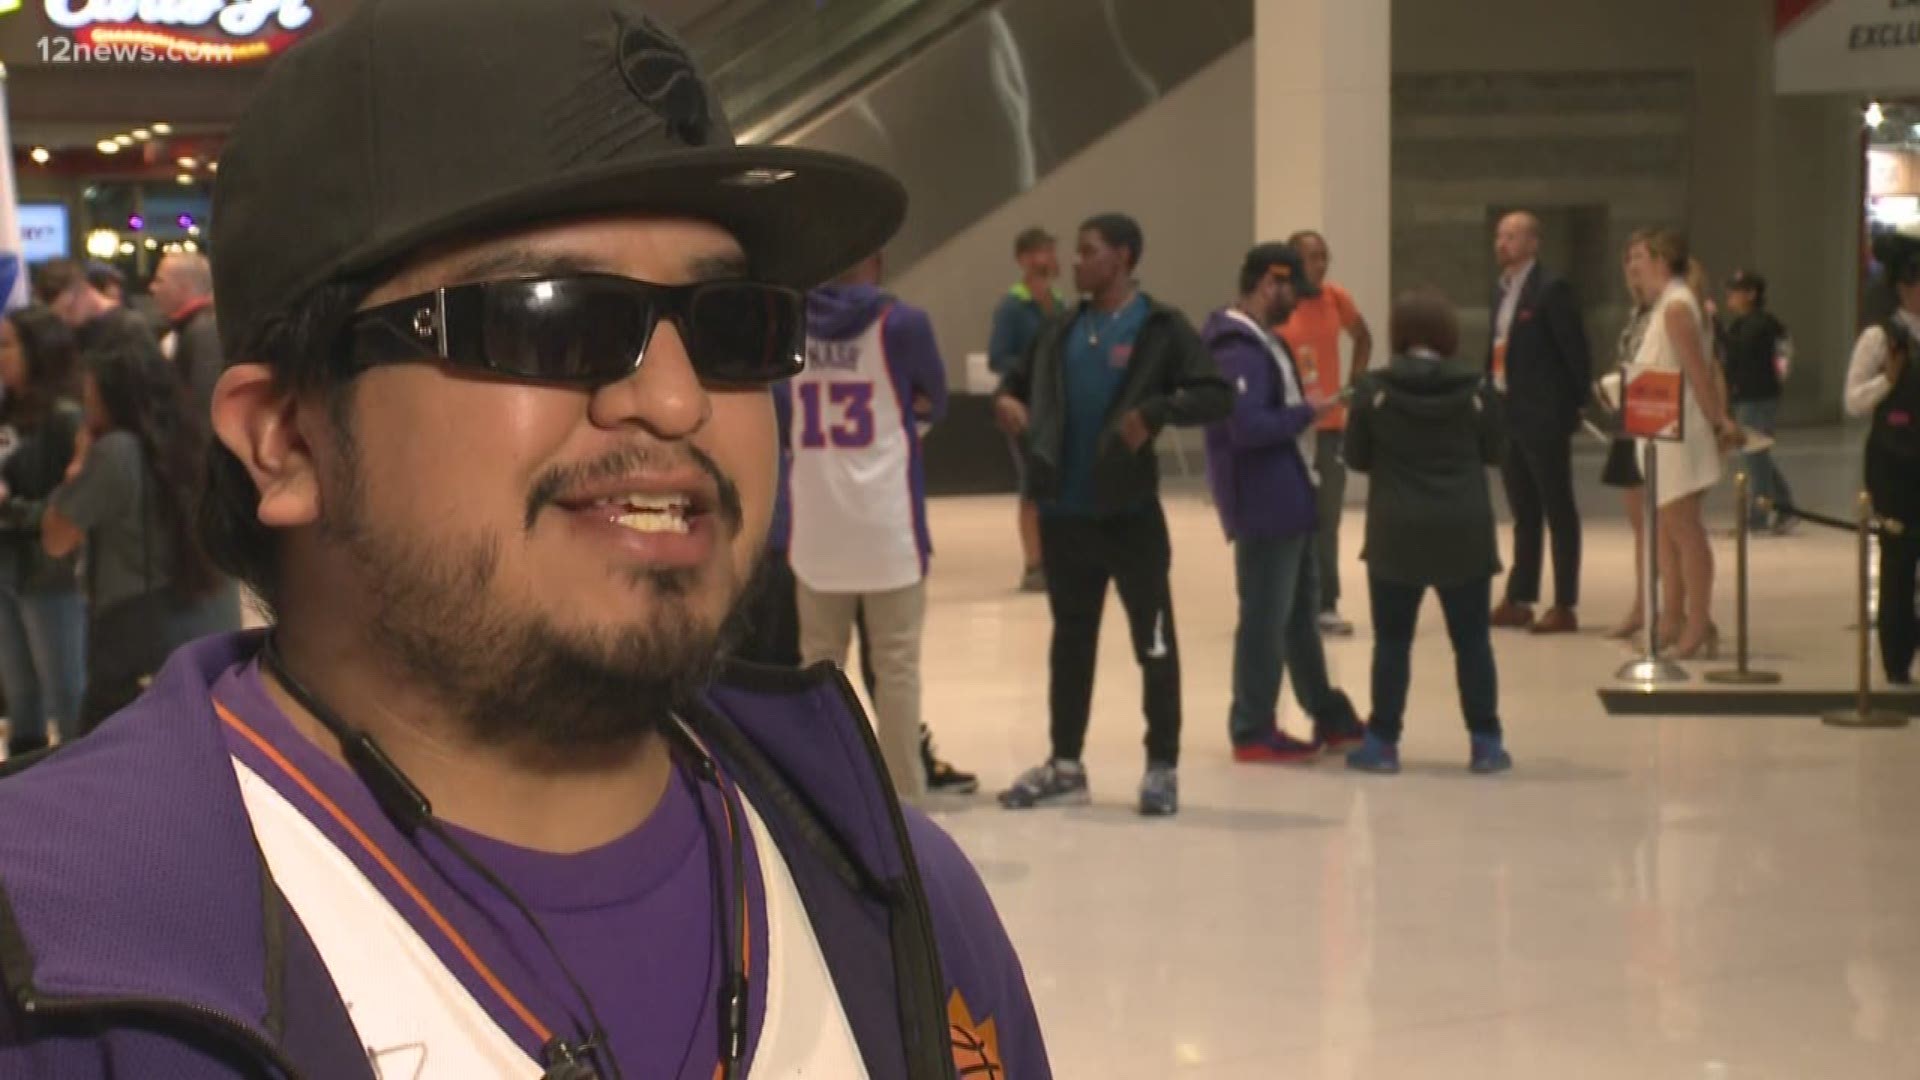 Meet the Suns biggest fan! Win or lose, being able to see or not, Brent Warren is cheering on the Phoenix Suns. Check out this superfan's dedication to the Valley's NBA team.